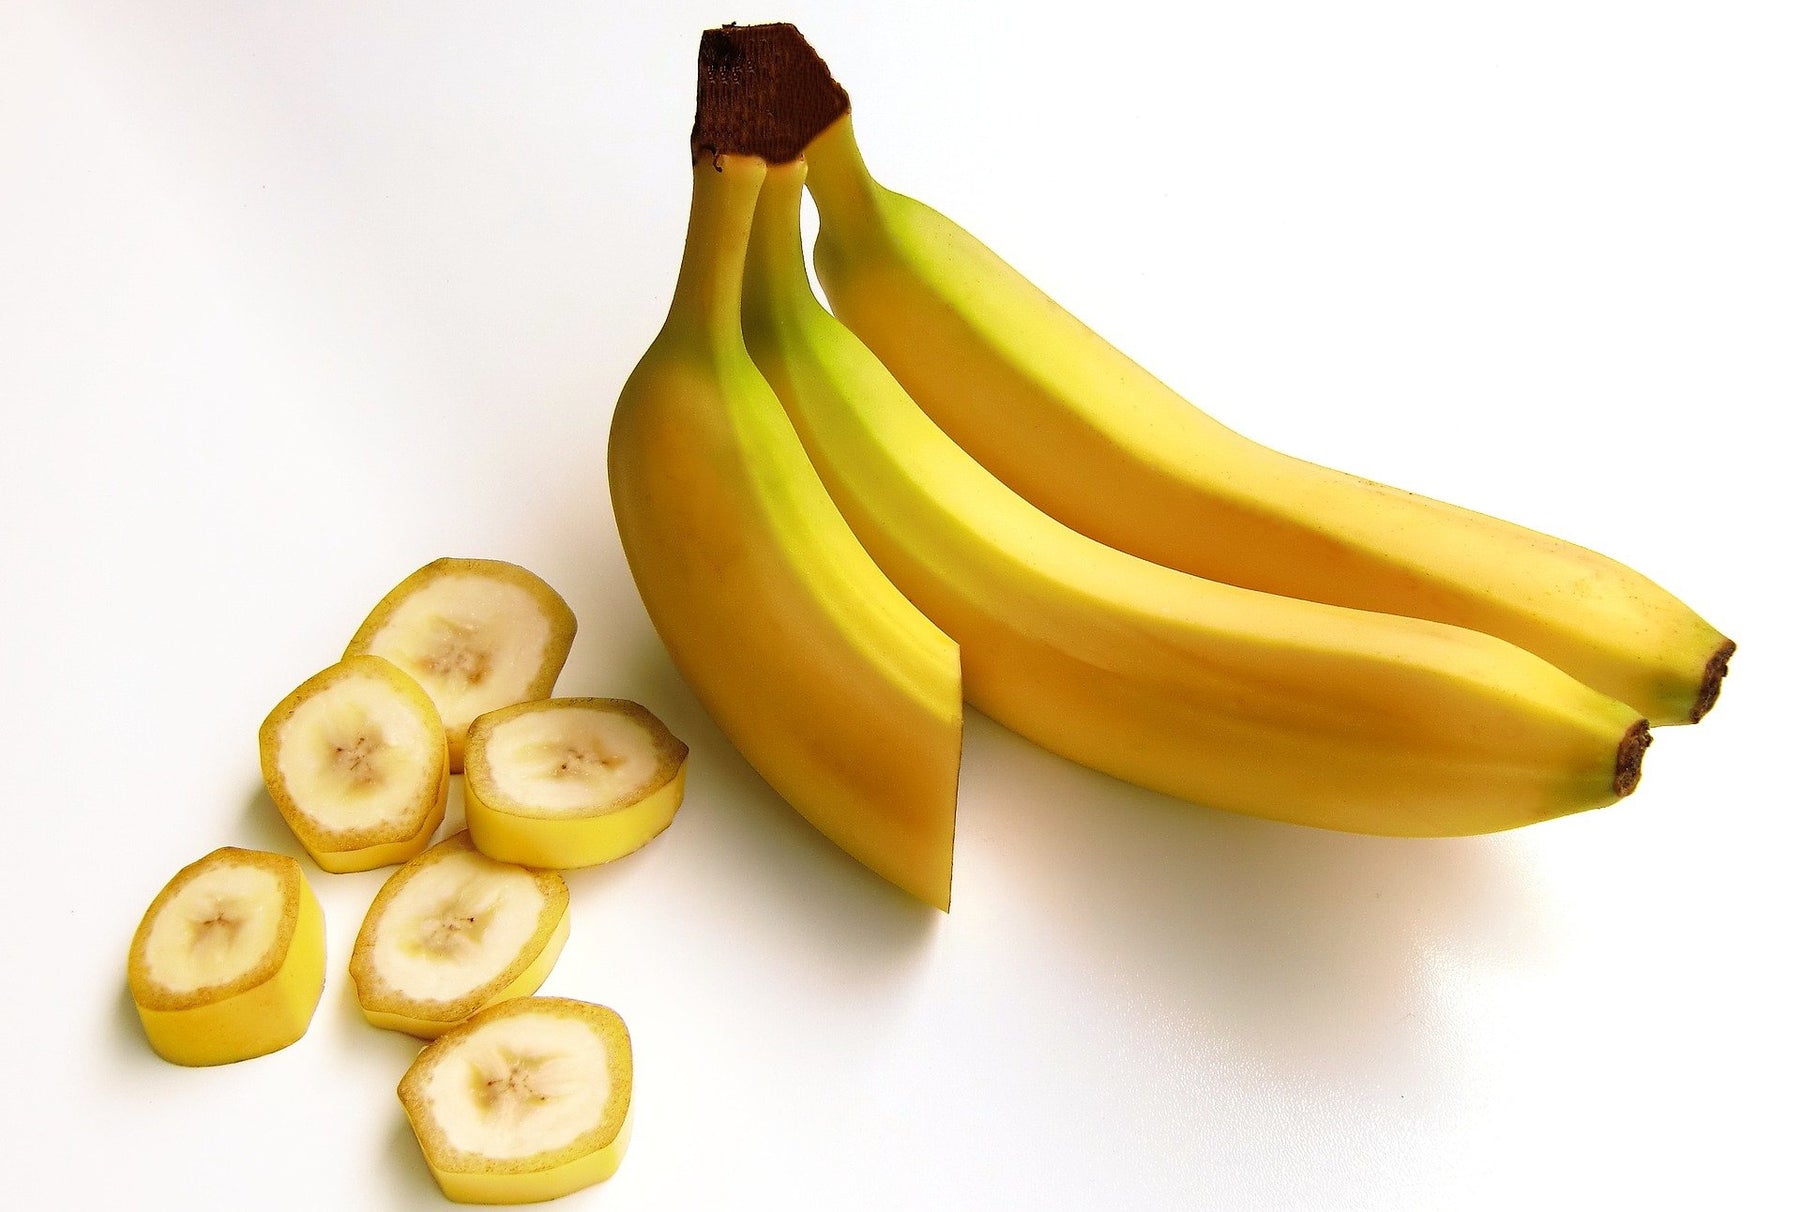 Three bananas one cut in half and sliced